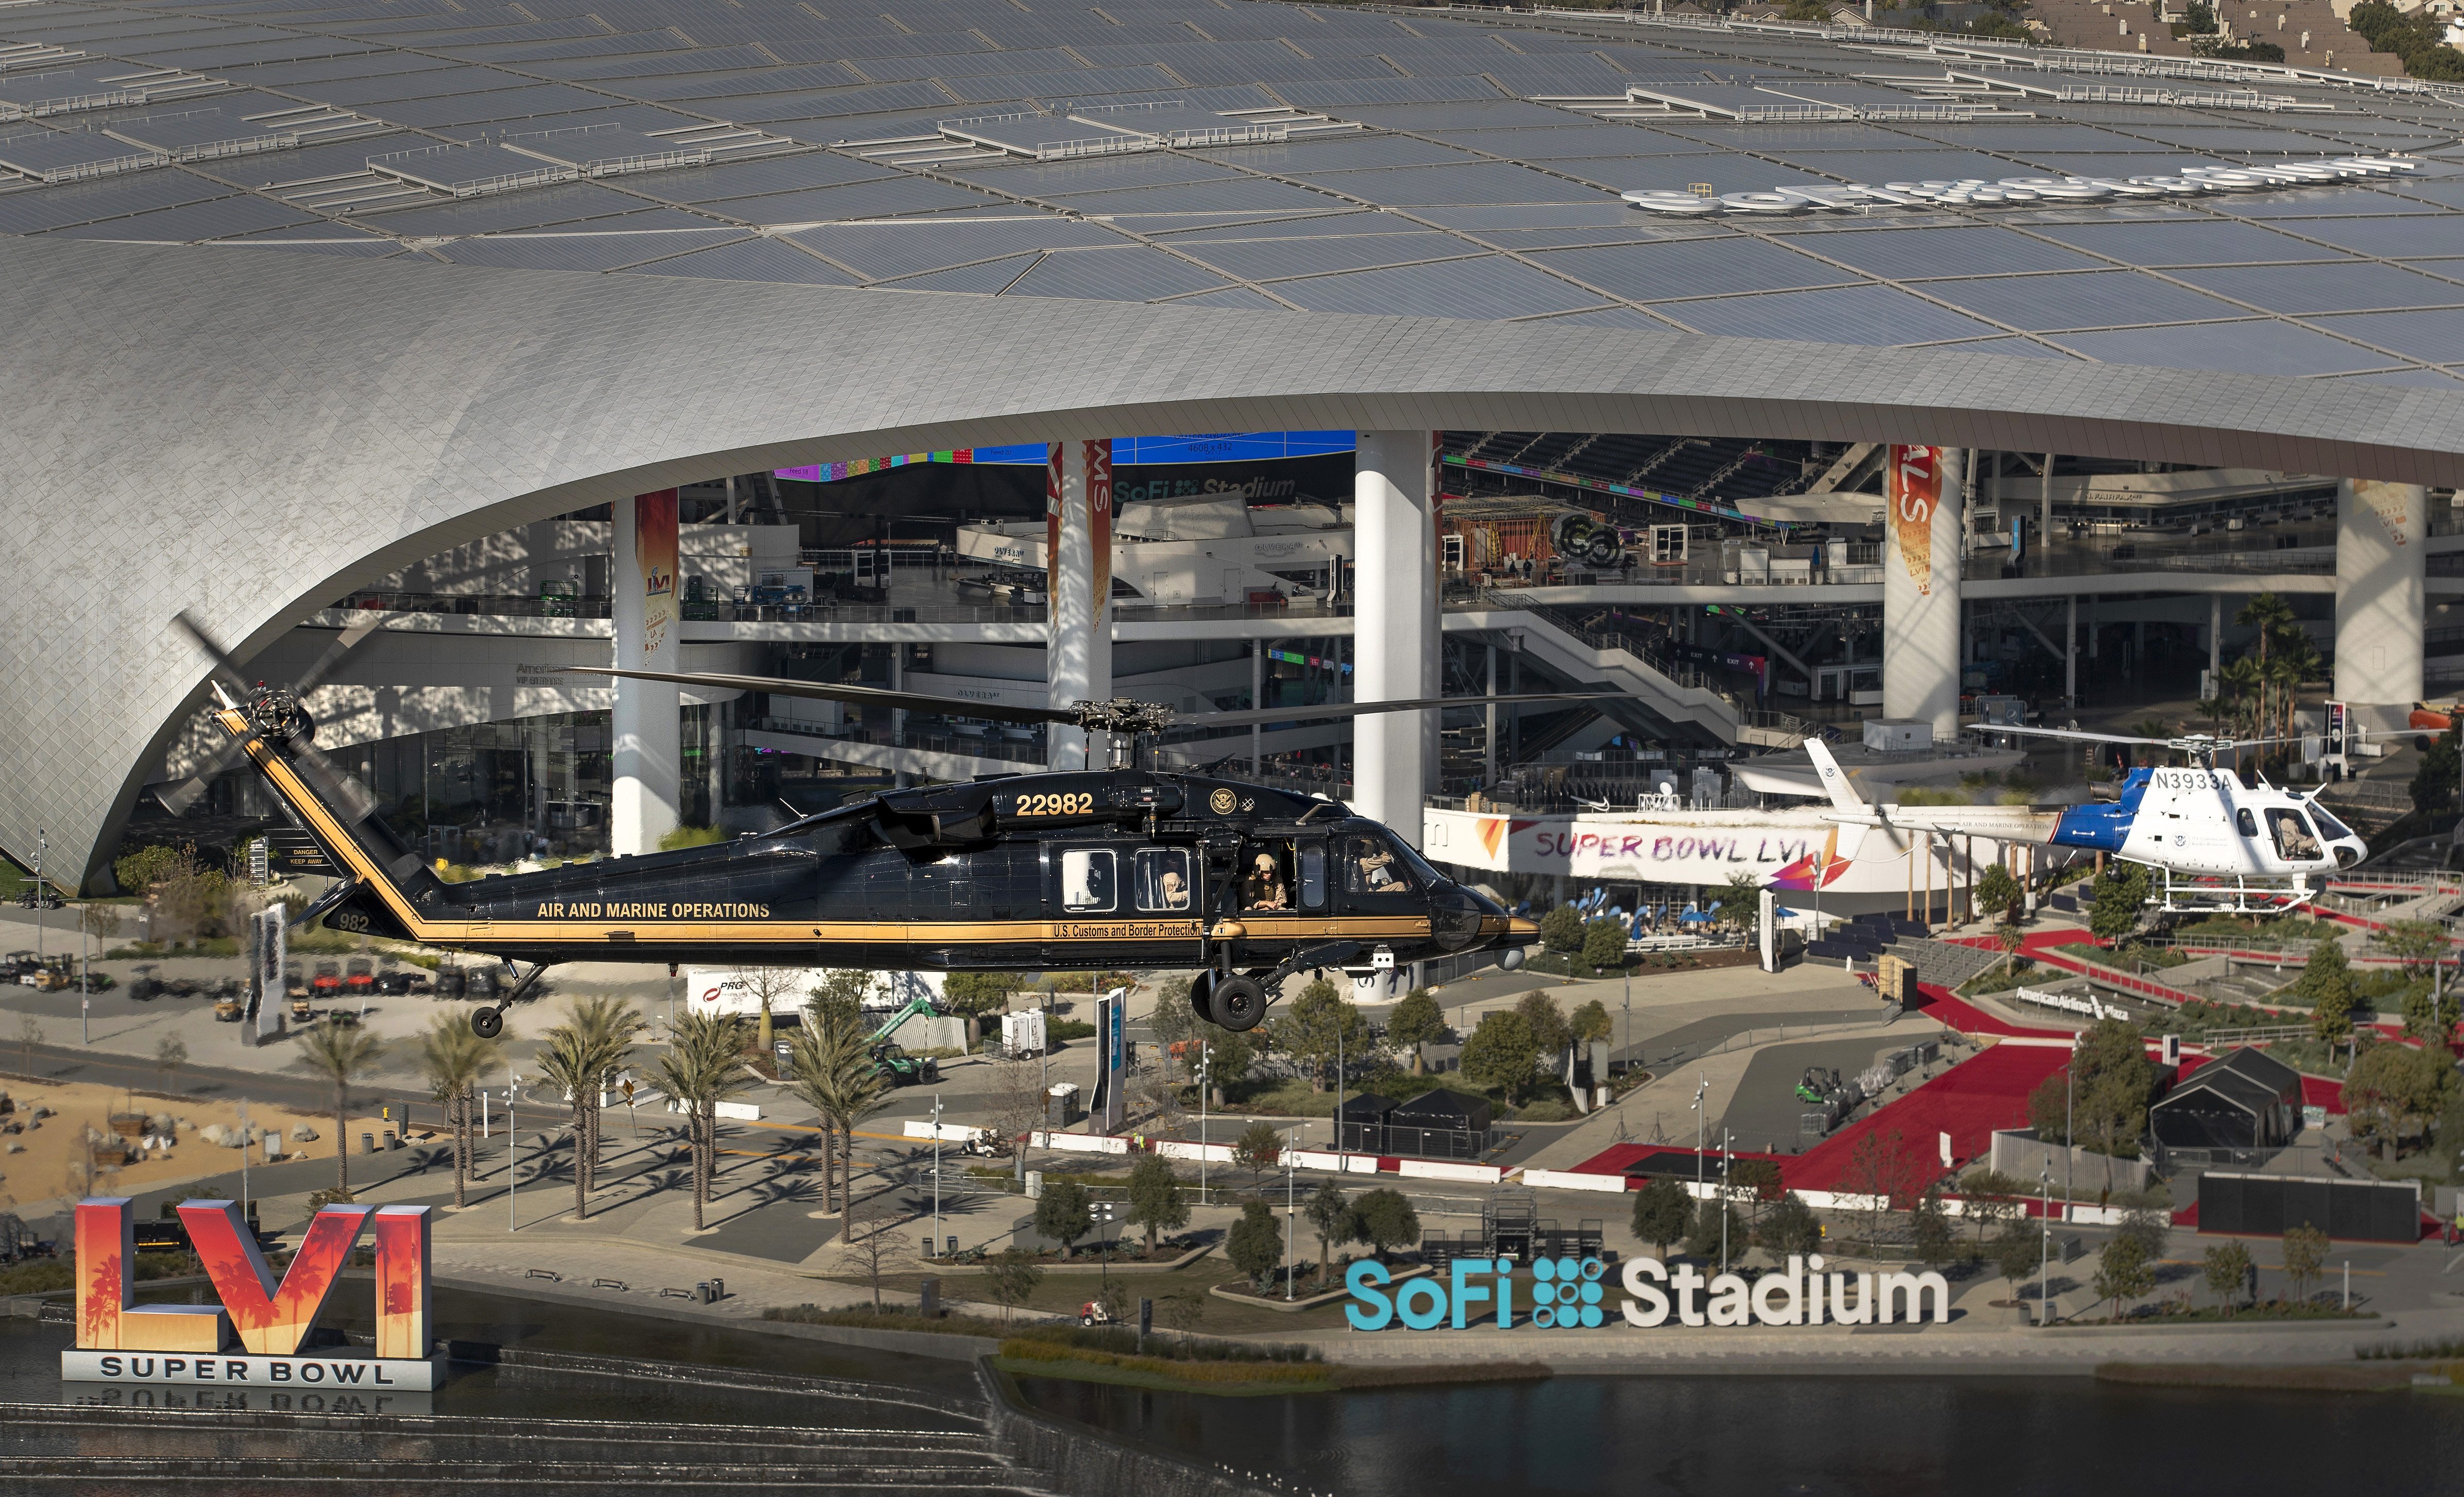 Two Air and Marine Operations helicopters fly over the Super Bowl stadium in 2022.